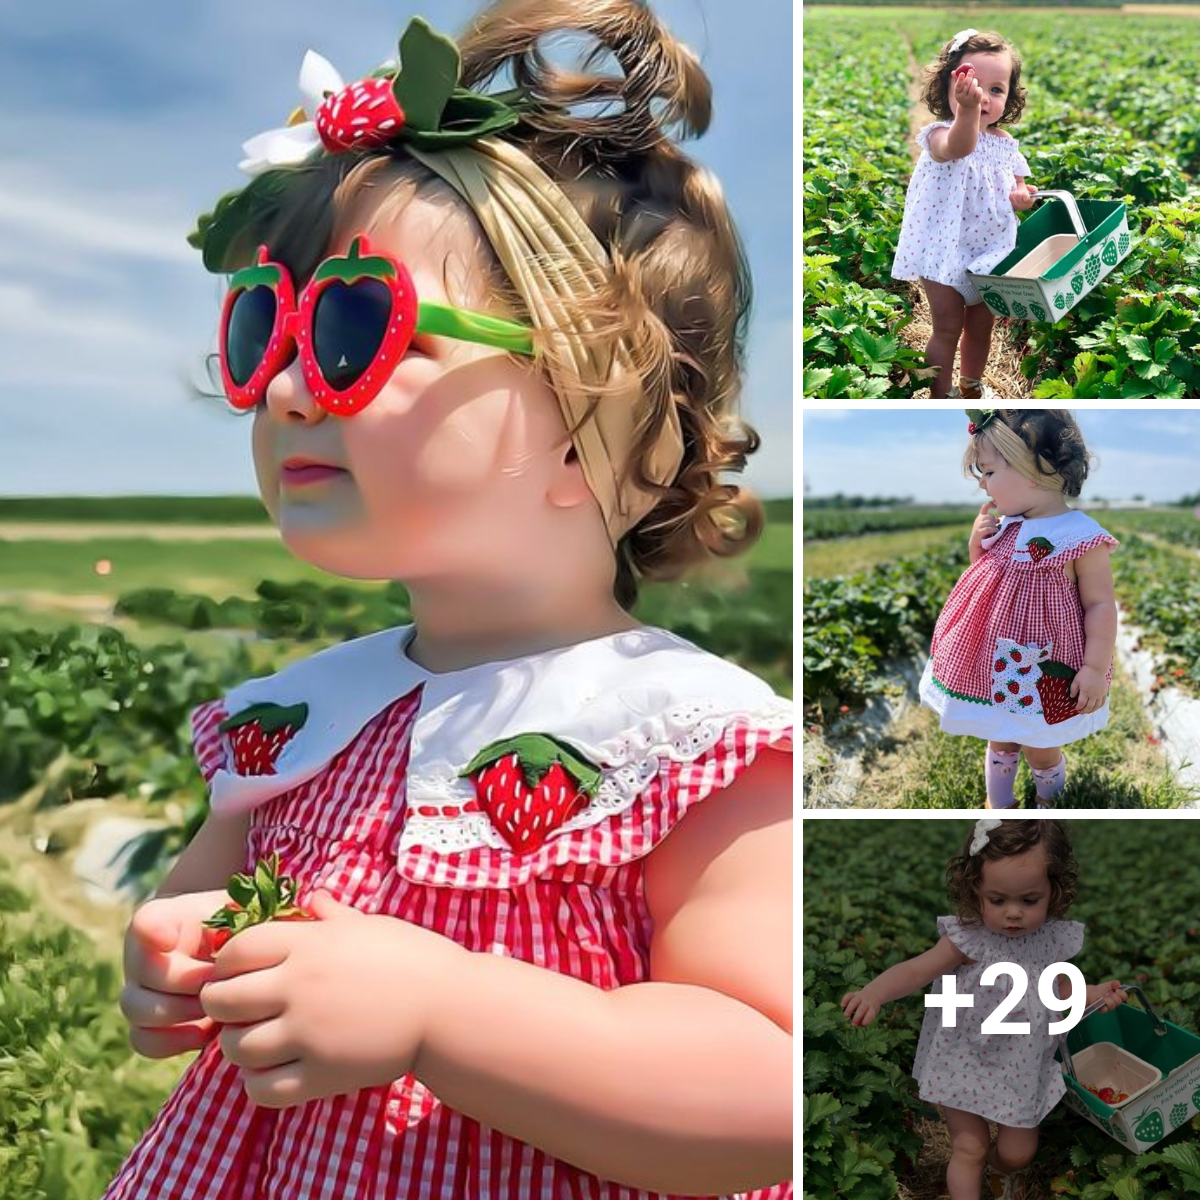 Mary, age 2, was thrilled to assist her grandparents in harvesting strawberries for the first time.